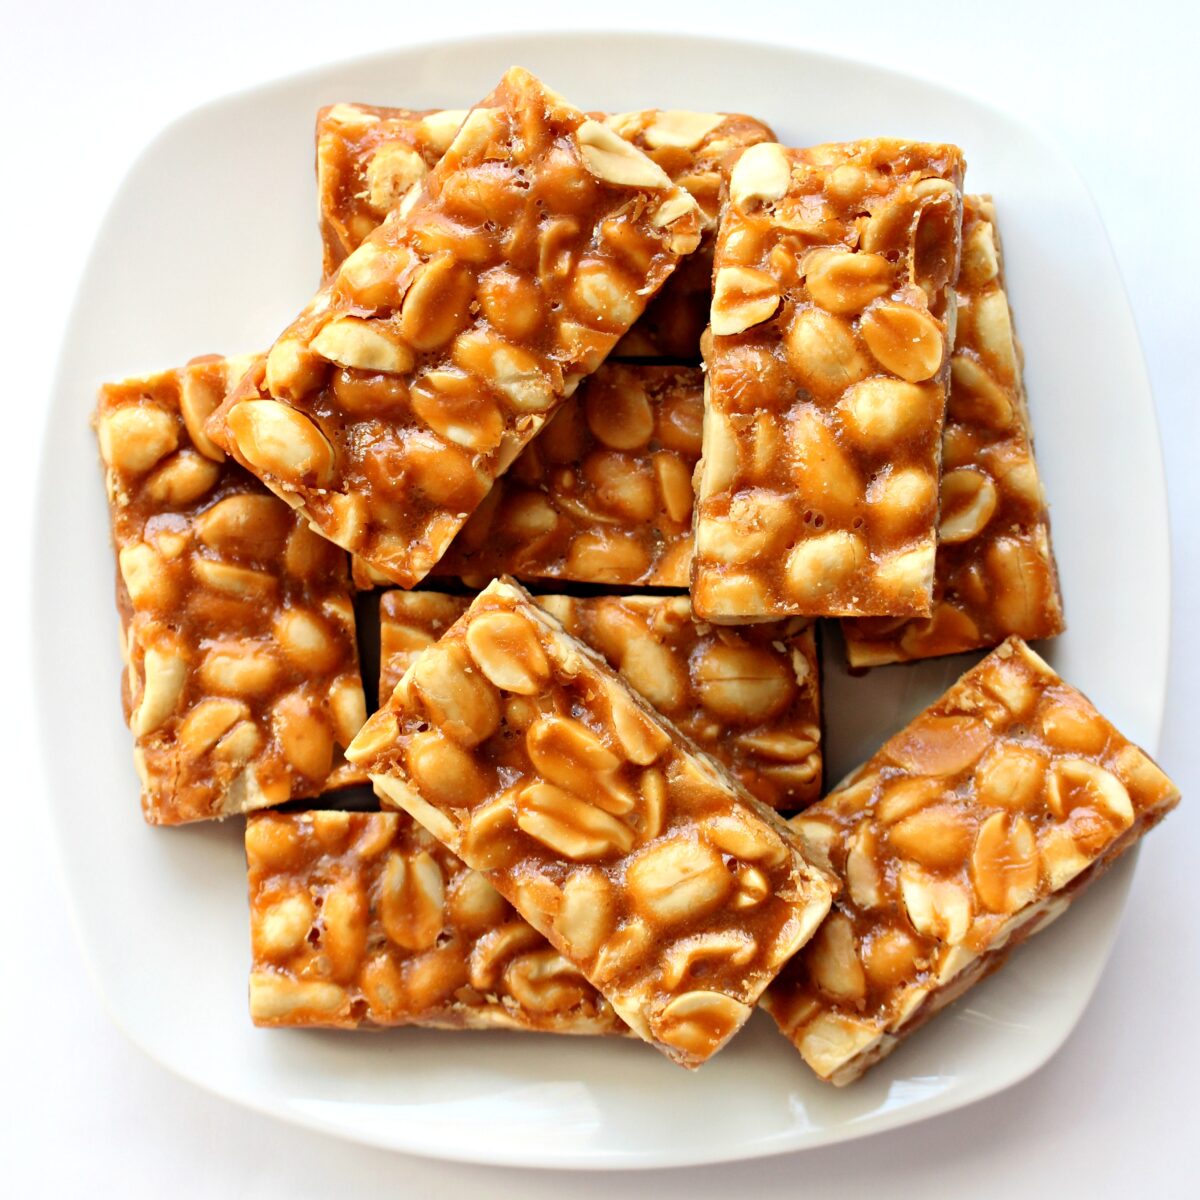  Peanut Bars on a square white plate.